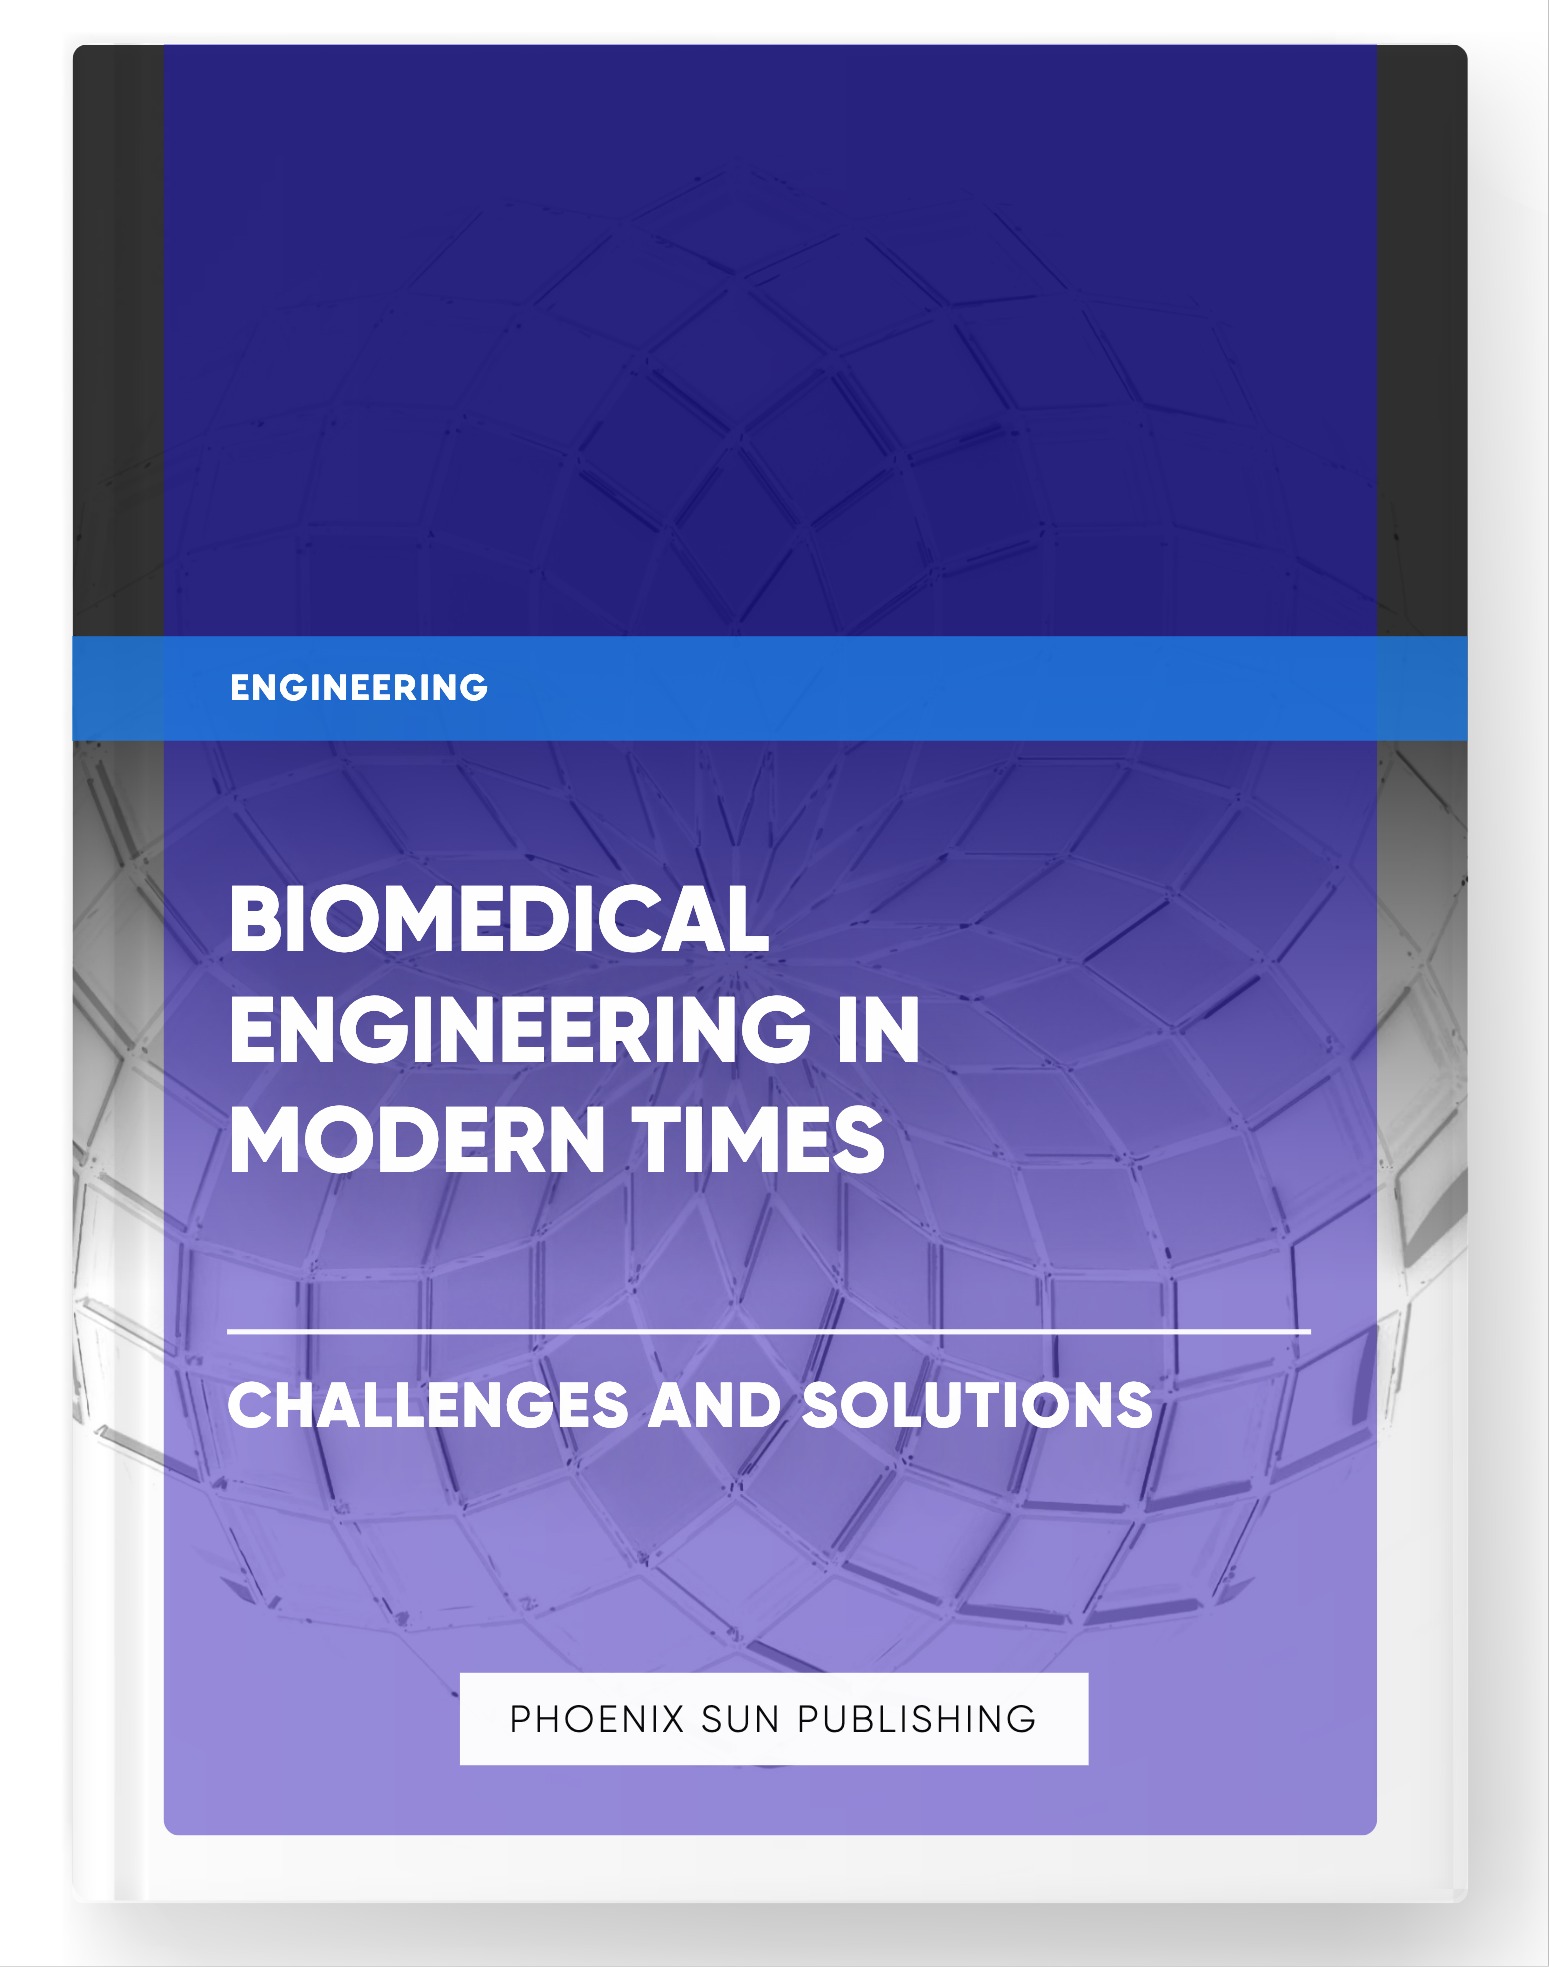 Biomedical Engineering in Modern Times – Challenges and Solutions